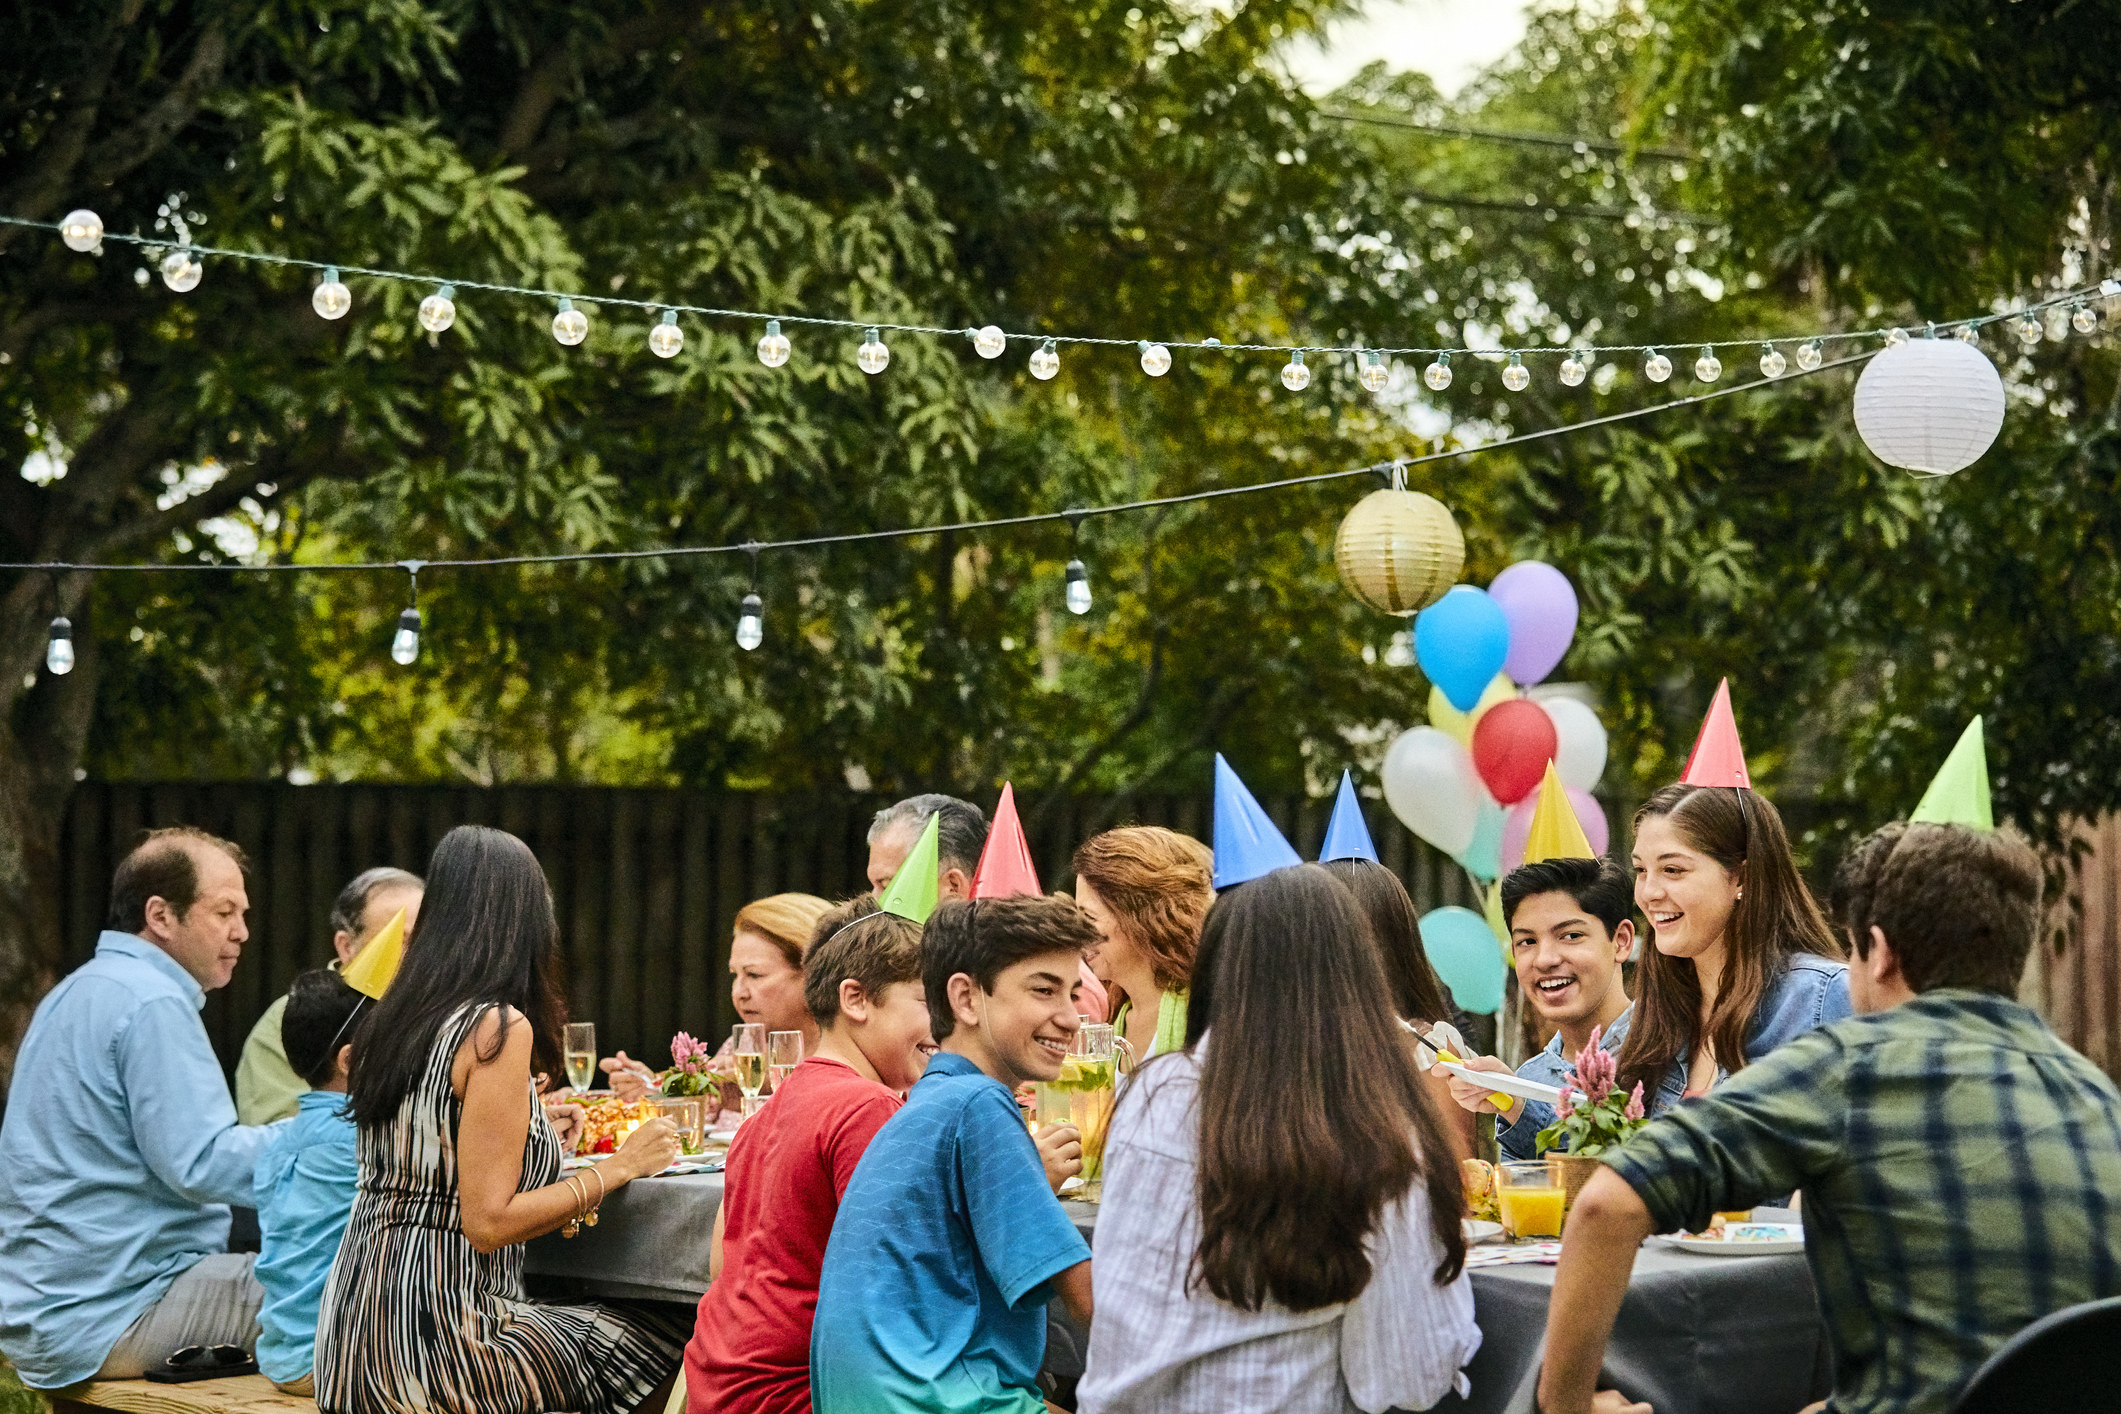 People at an outdoor birthday party